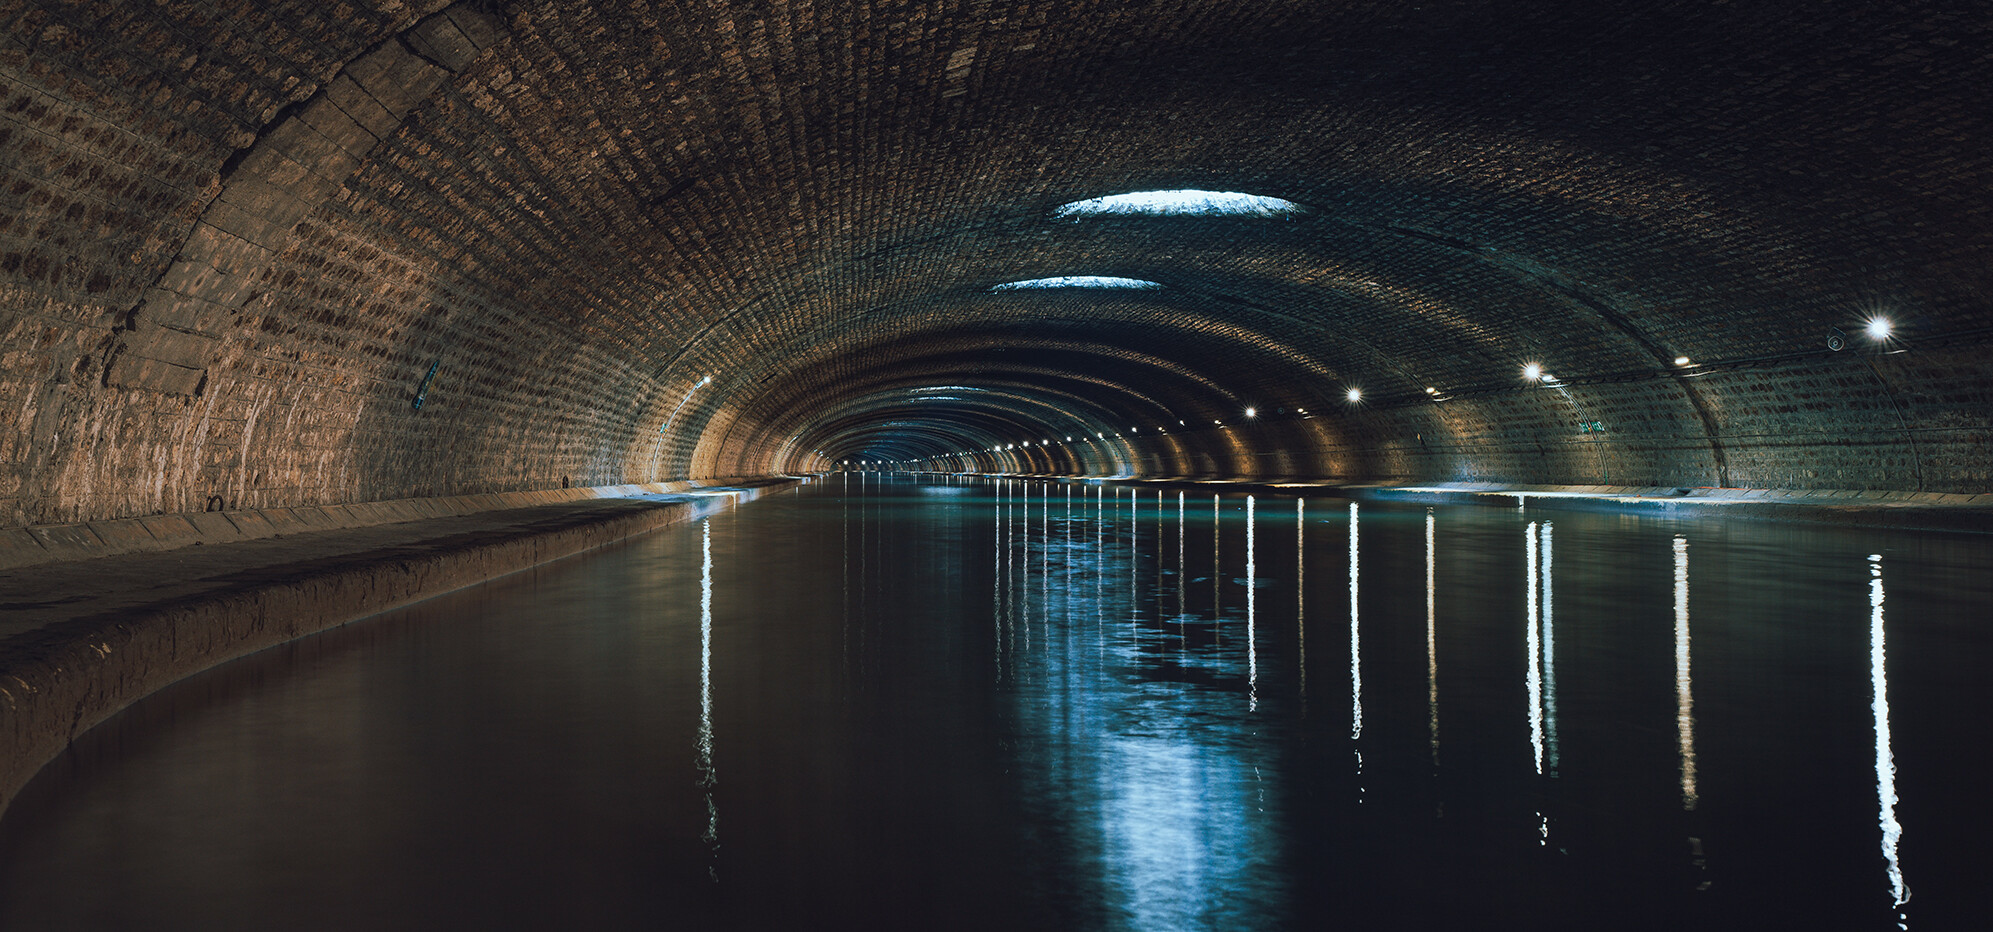 Berlin is one of five cities taking part in the EU Horizon 2020 project digital-water.city